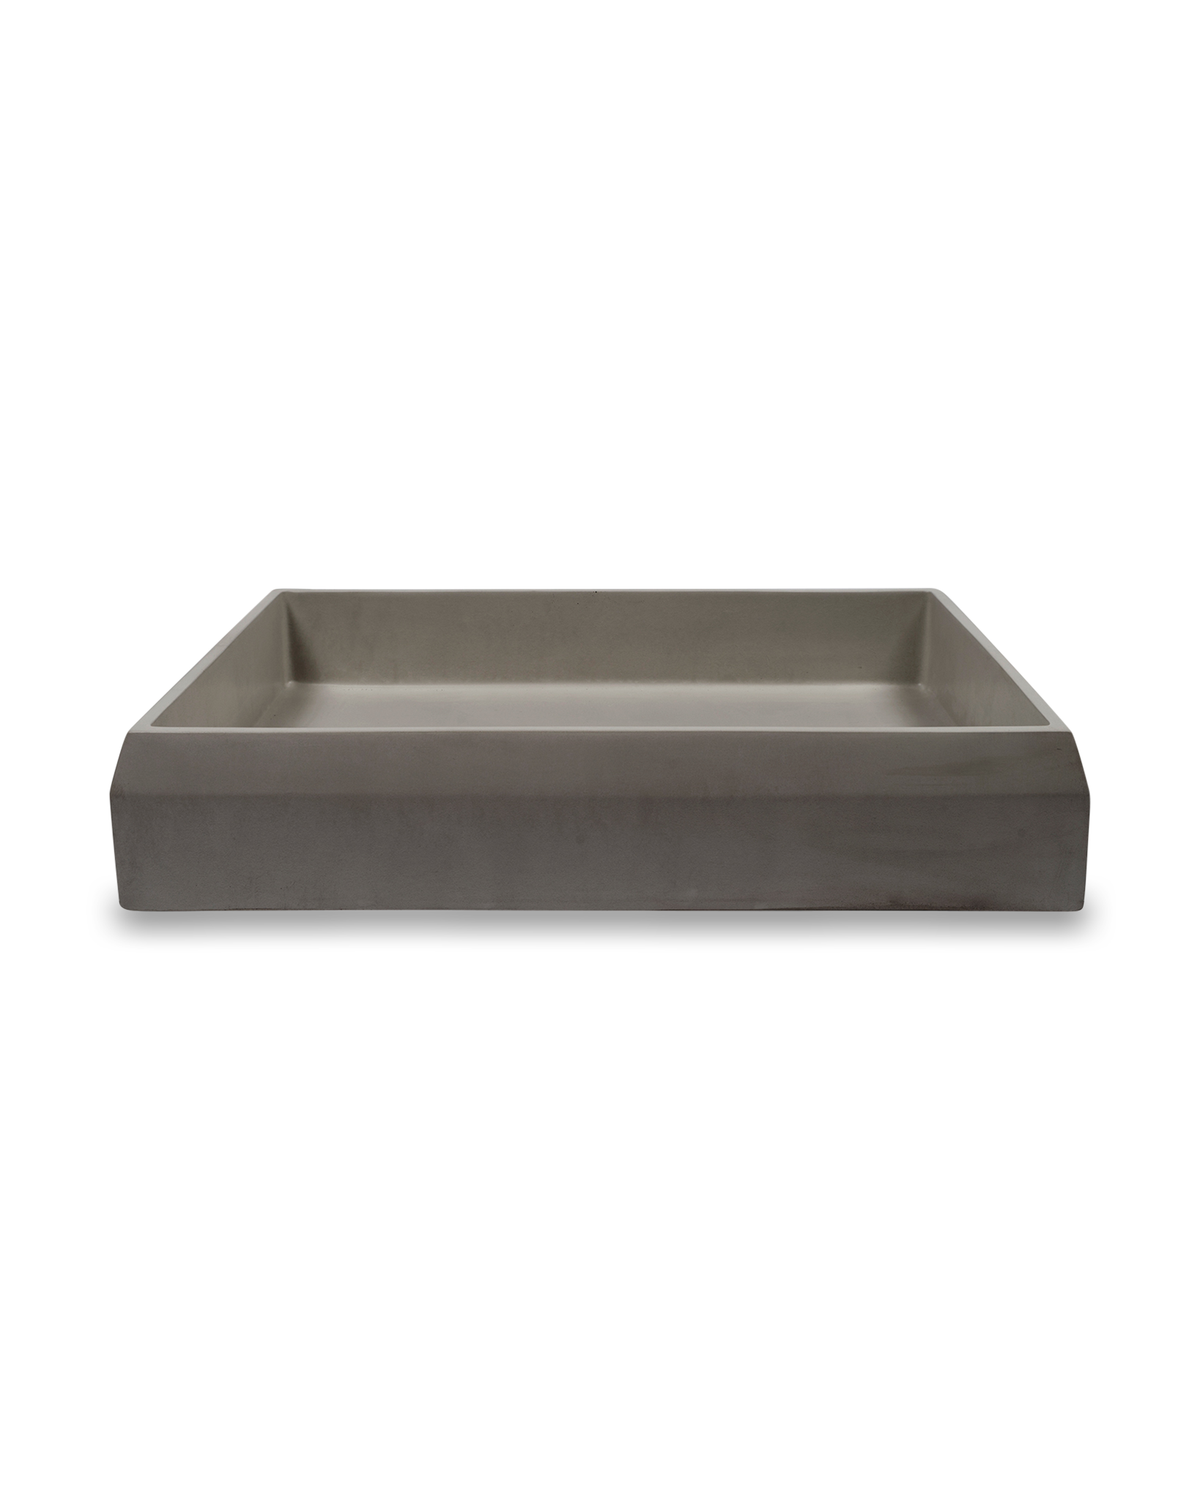 Prism Rectangle Basin - Surface Mount (Mid Tone Grey)